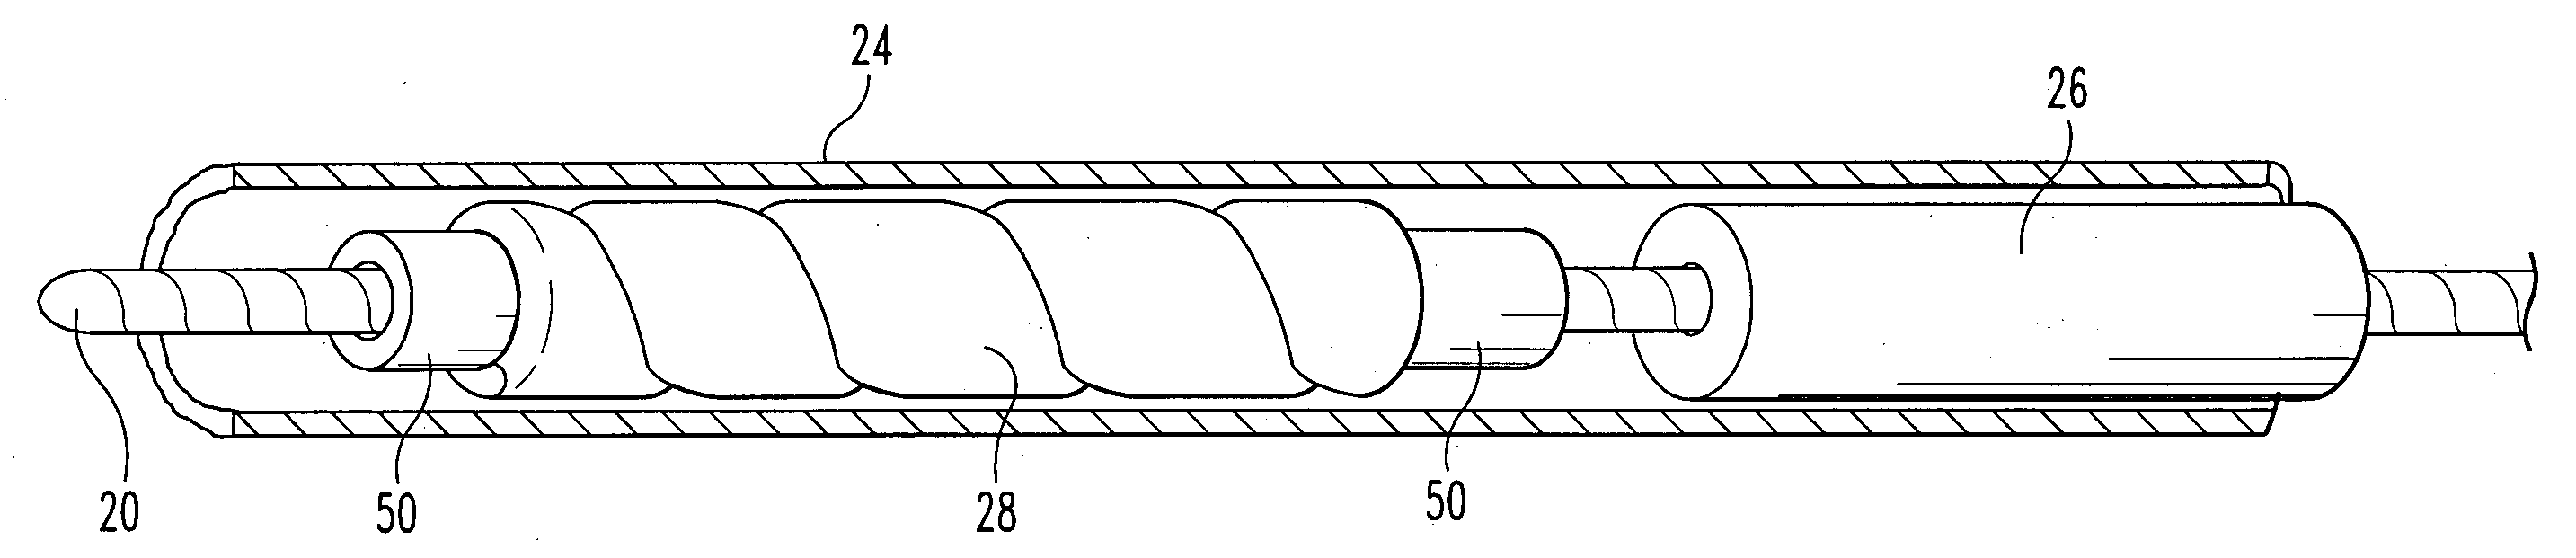 Inflatable occlusion devices, methods, and systems